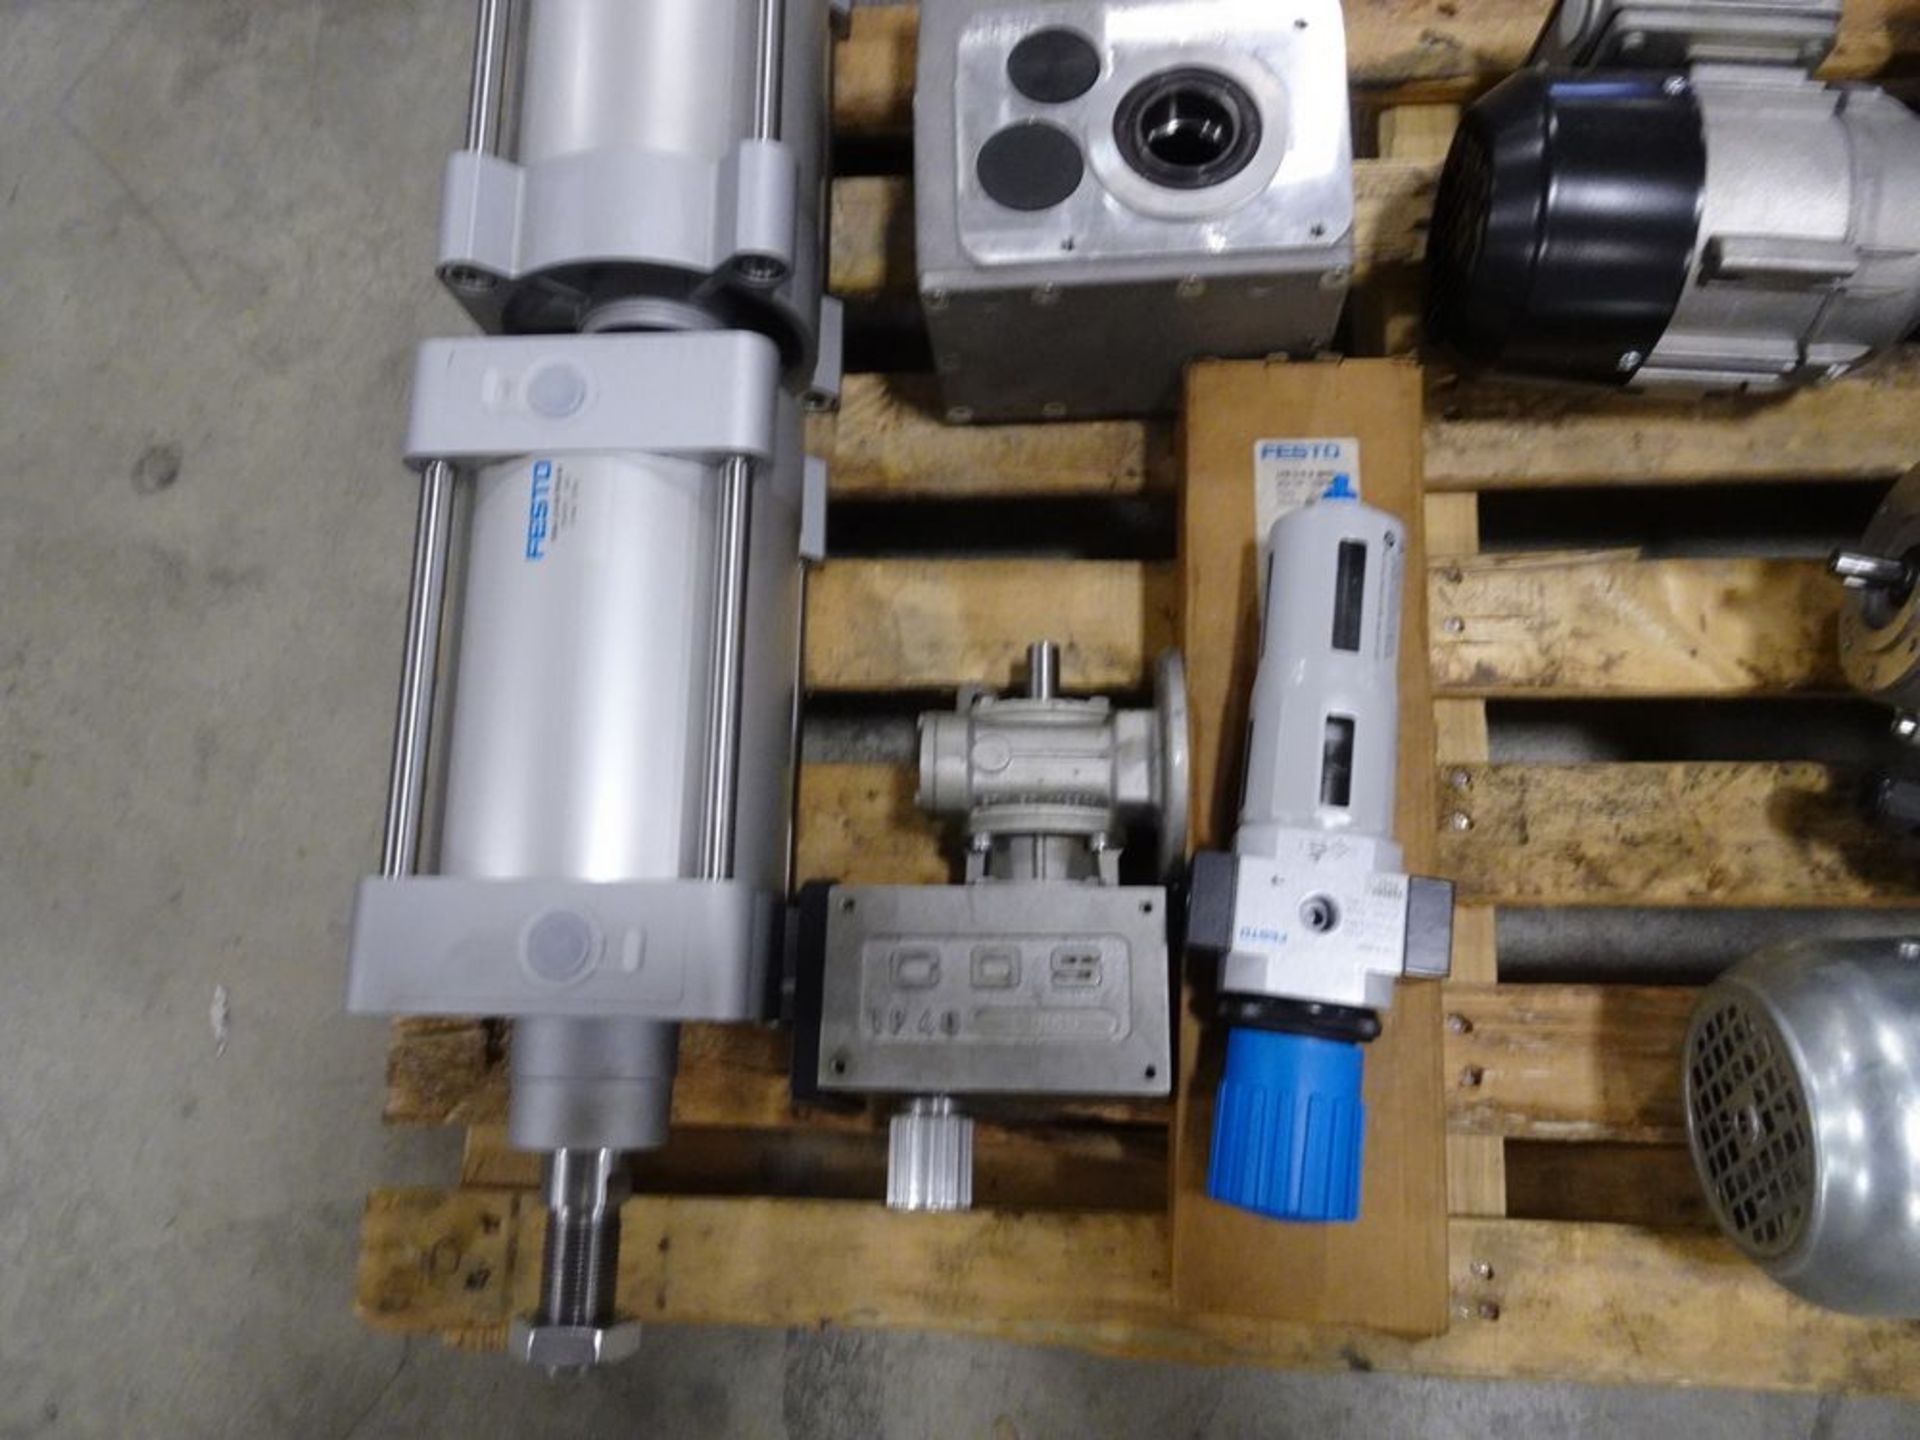 ASSORTED PRODUCT, FESTO VALVES, DRIVES, MOTORS, GEARBOXES, ETC. - Image 4 of 5